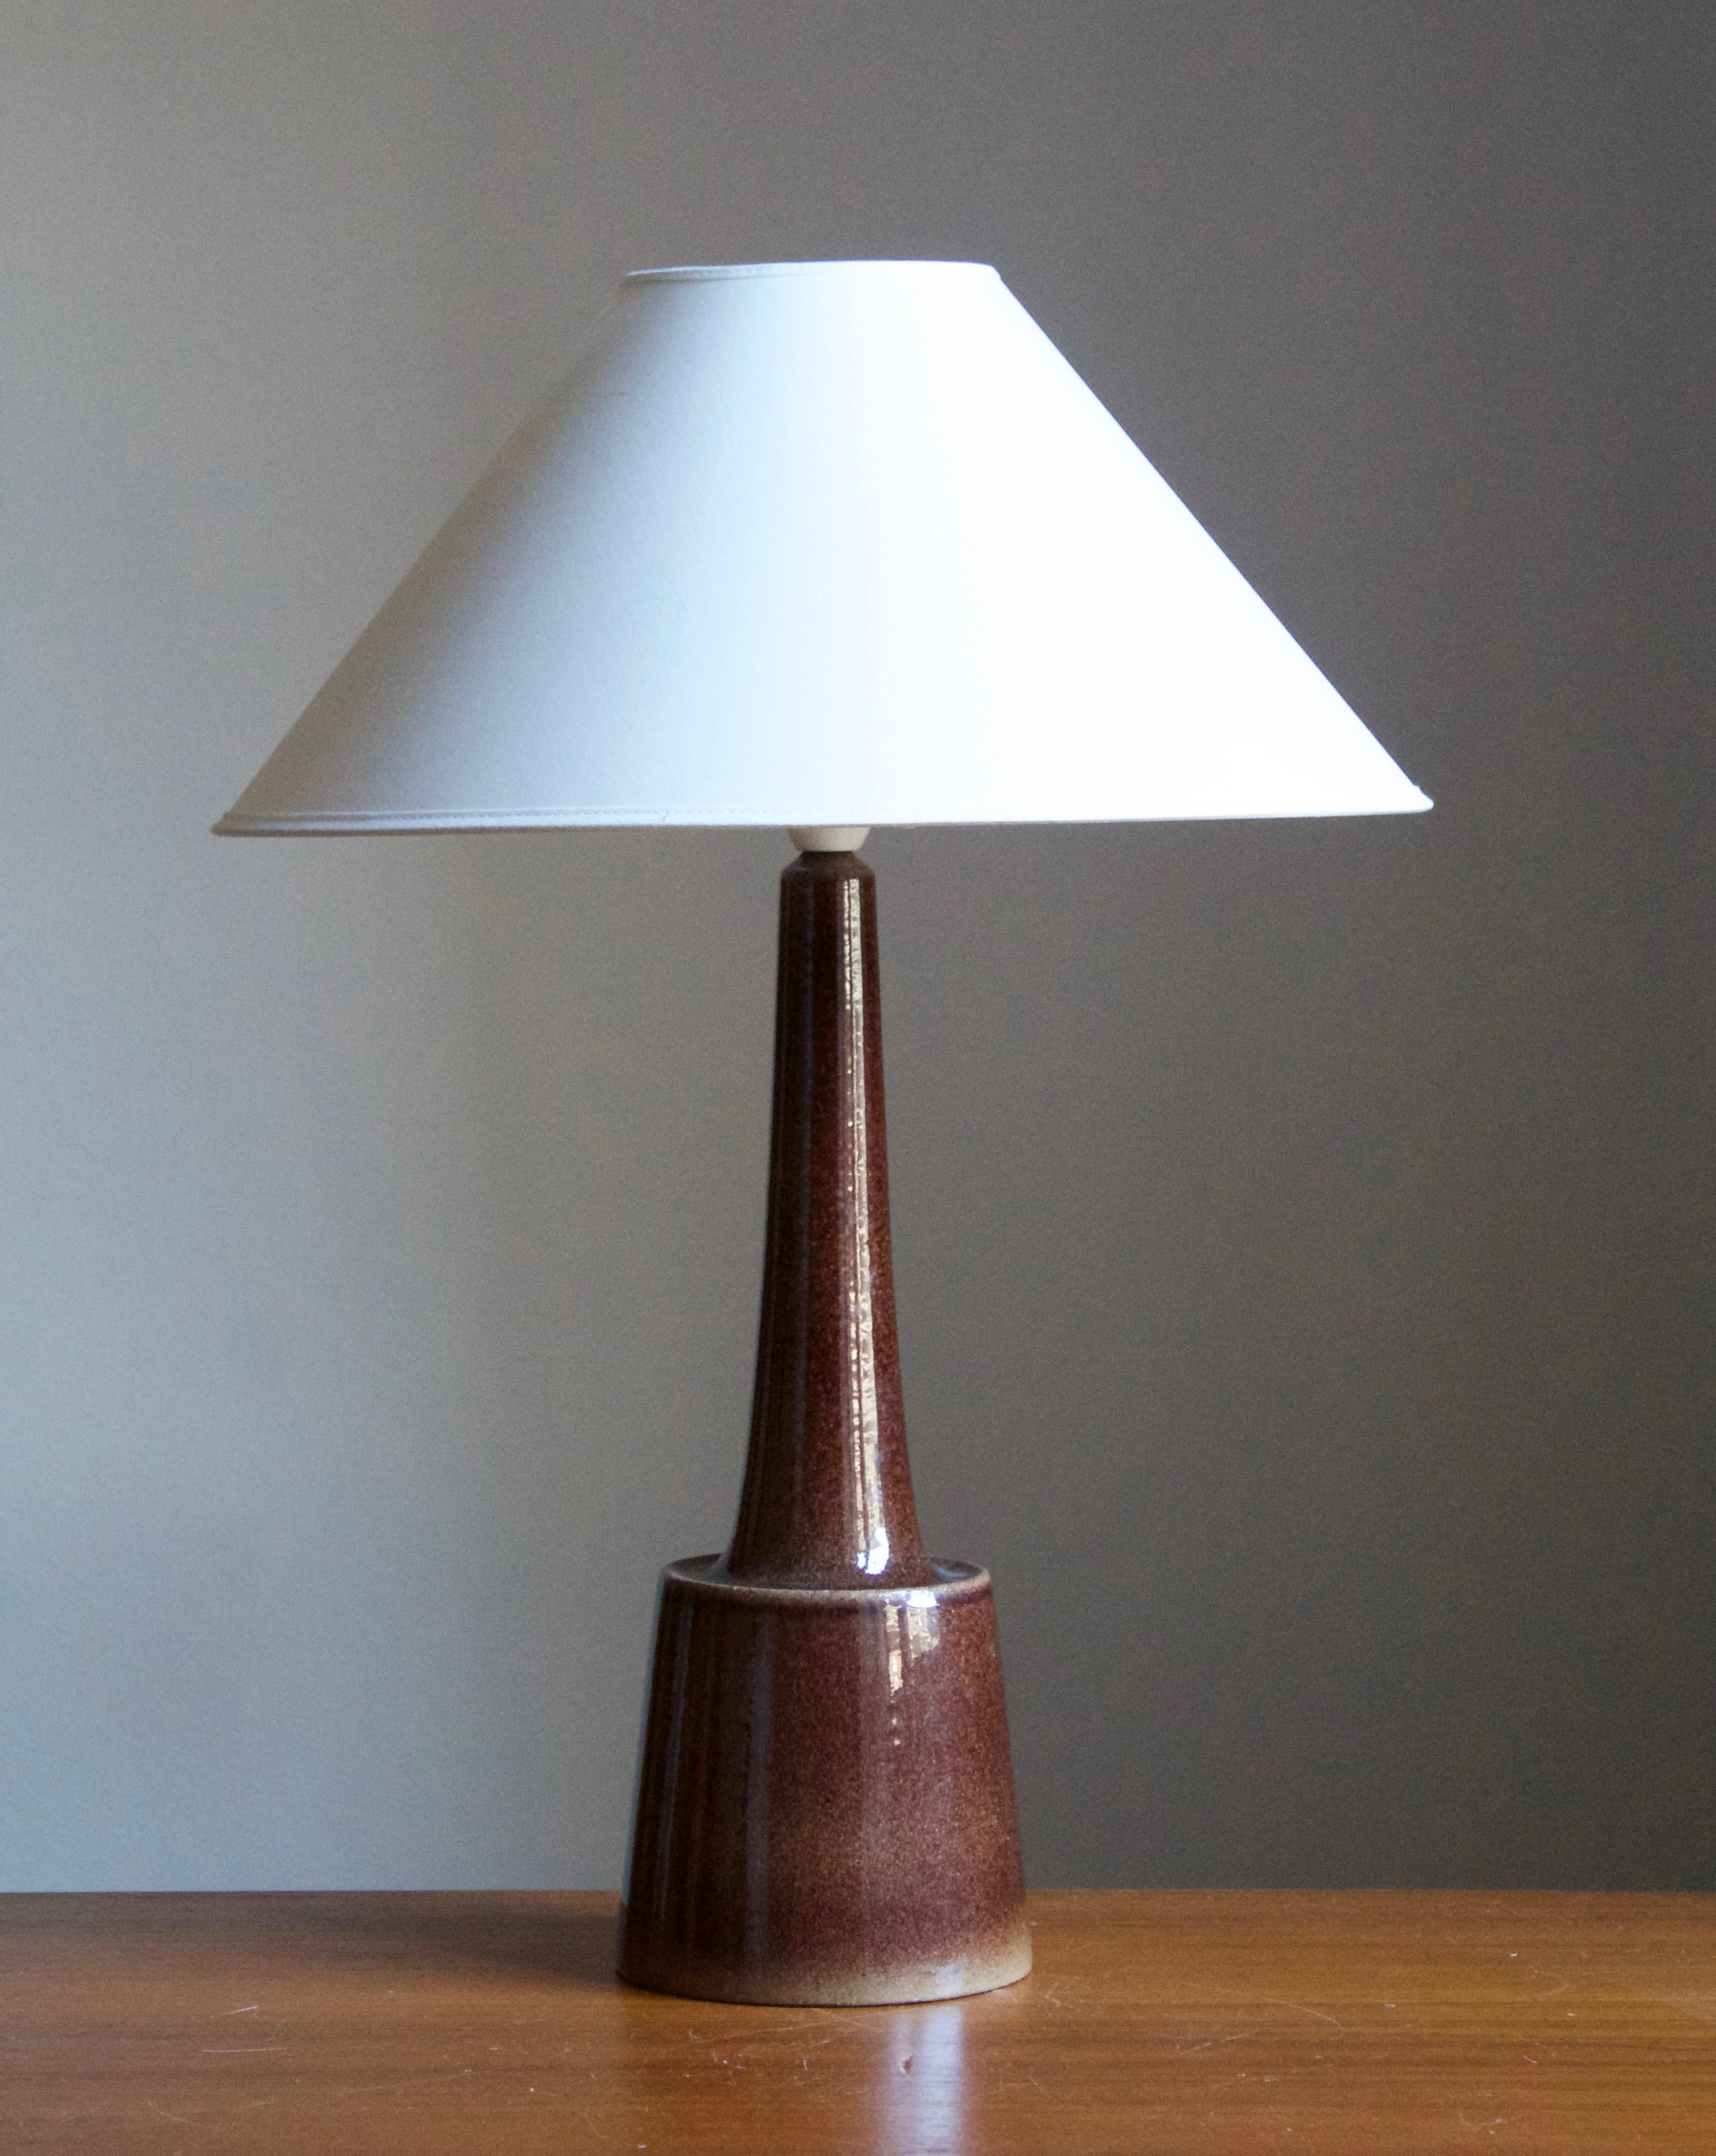 A table / desk lamp attributed to husband and wife Per & Annelise Linneman-Schmidt. Handcast in stoneware. Presumably produced in their own Studio, named Palshus, in Sengeløse, Denmark. Unsigned and unmarked.

Sold without lampshade. Stated